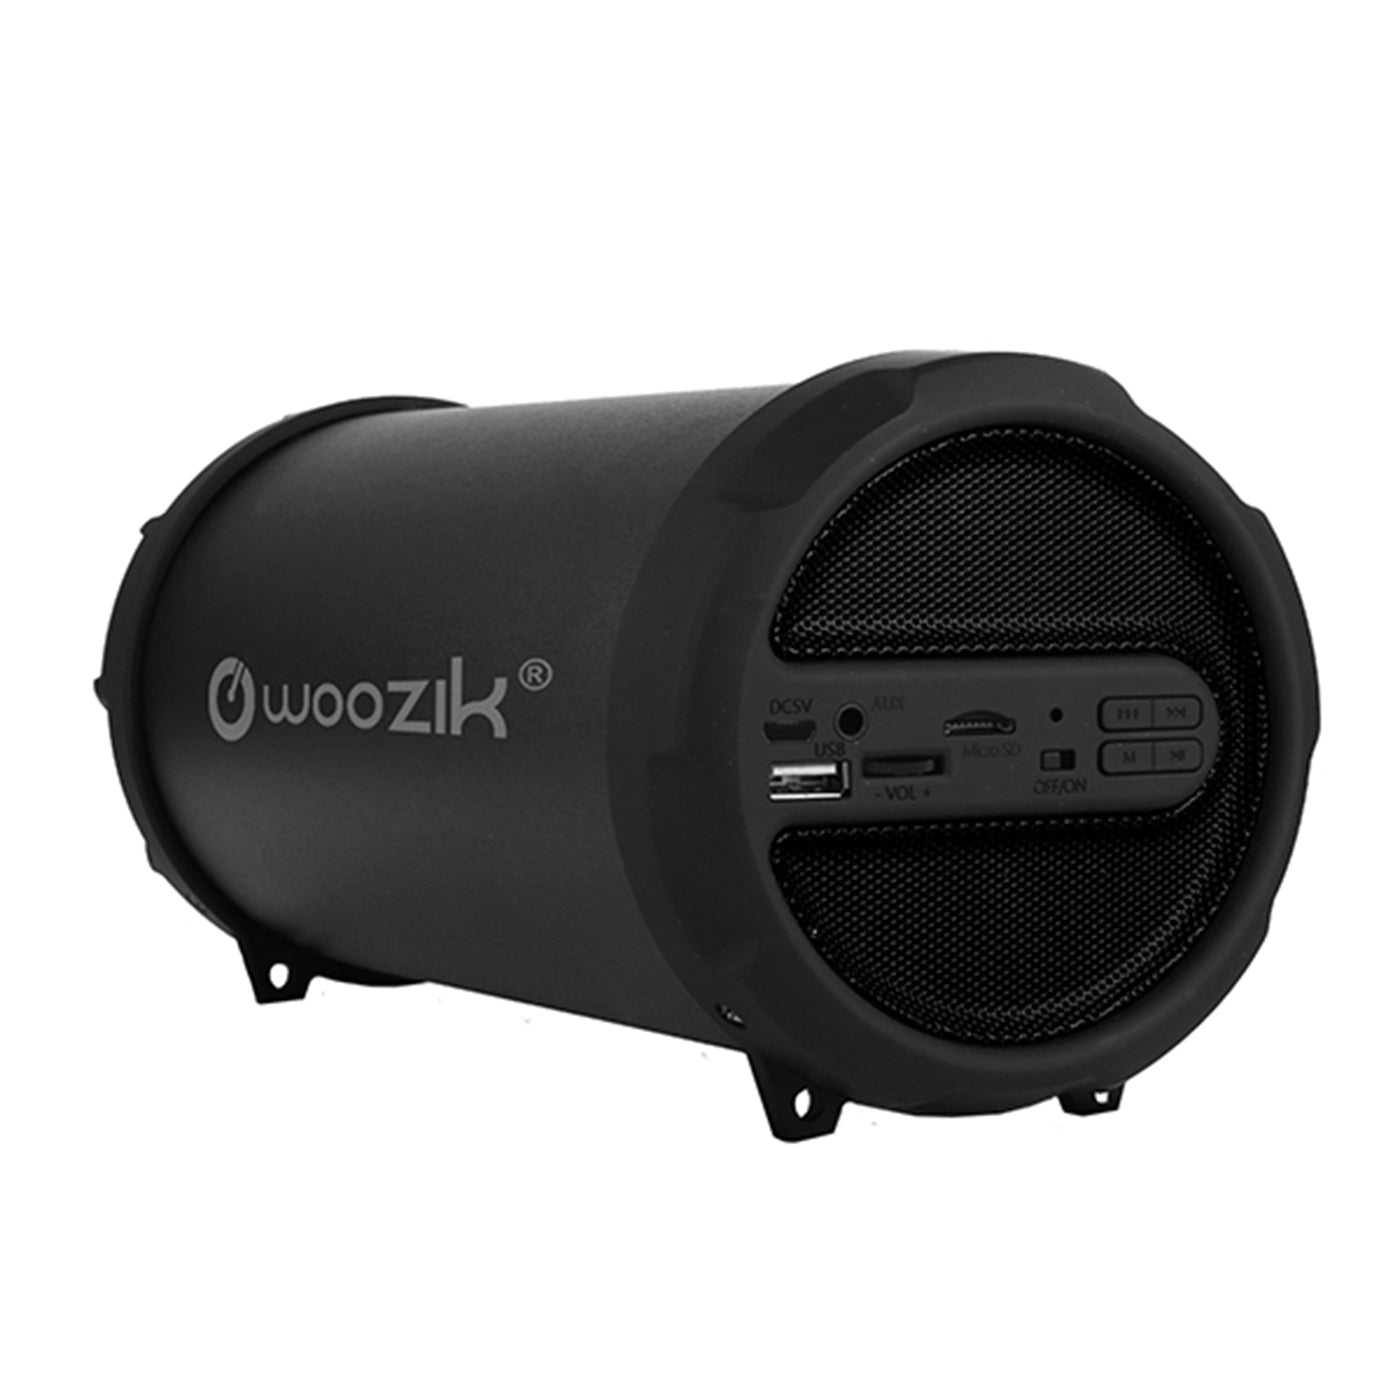 Rockit Go Bluetooth Speaker FM Radio, Micro SD Card, USB, AUX 3.5mm Support, and Strap In Black